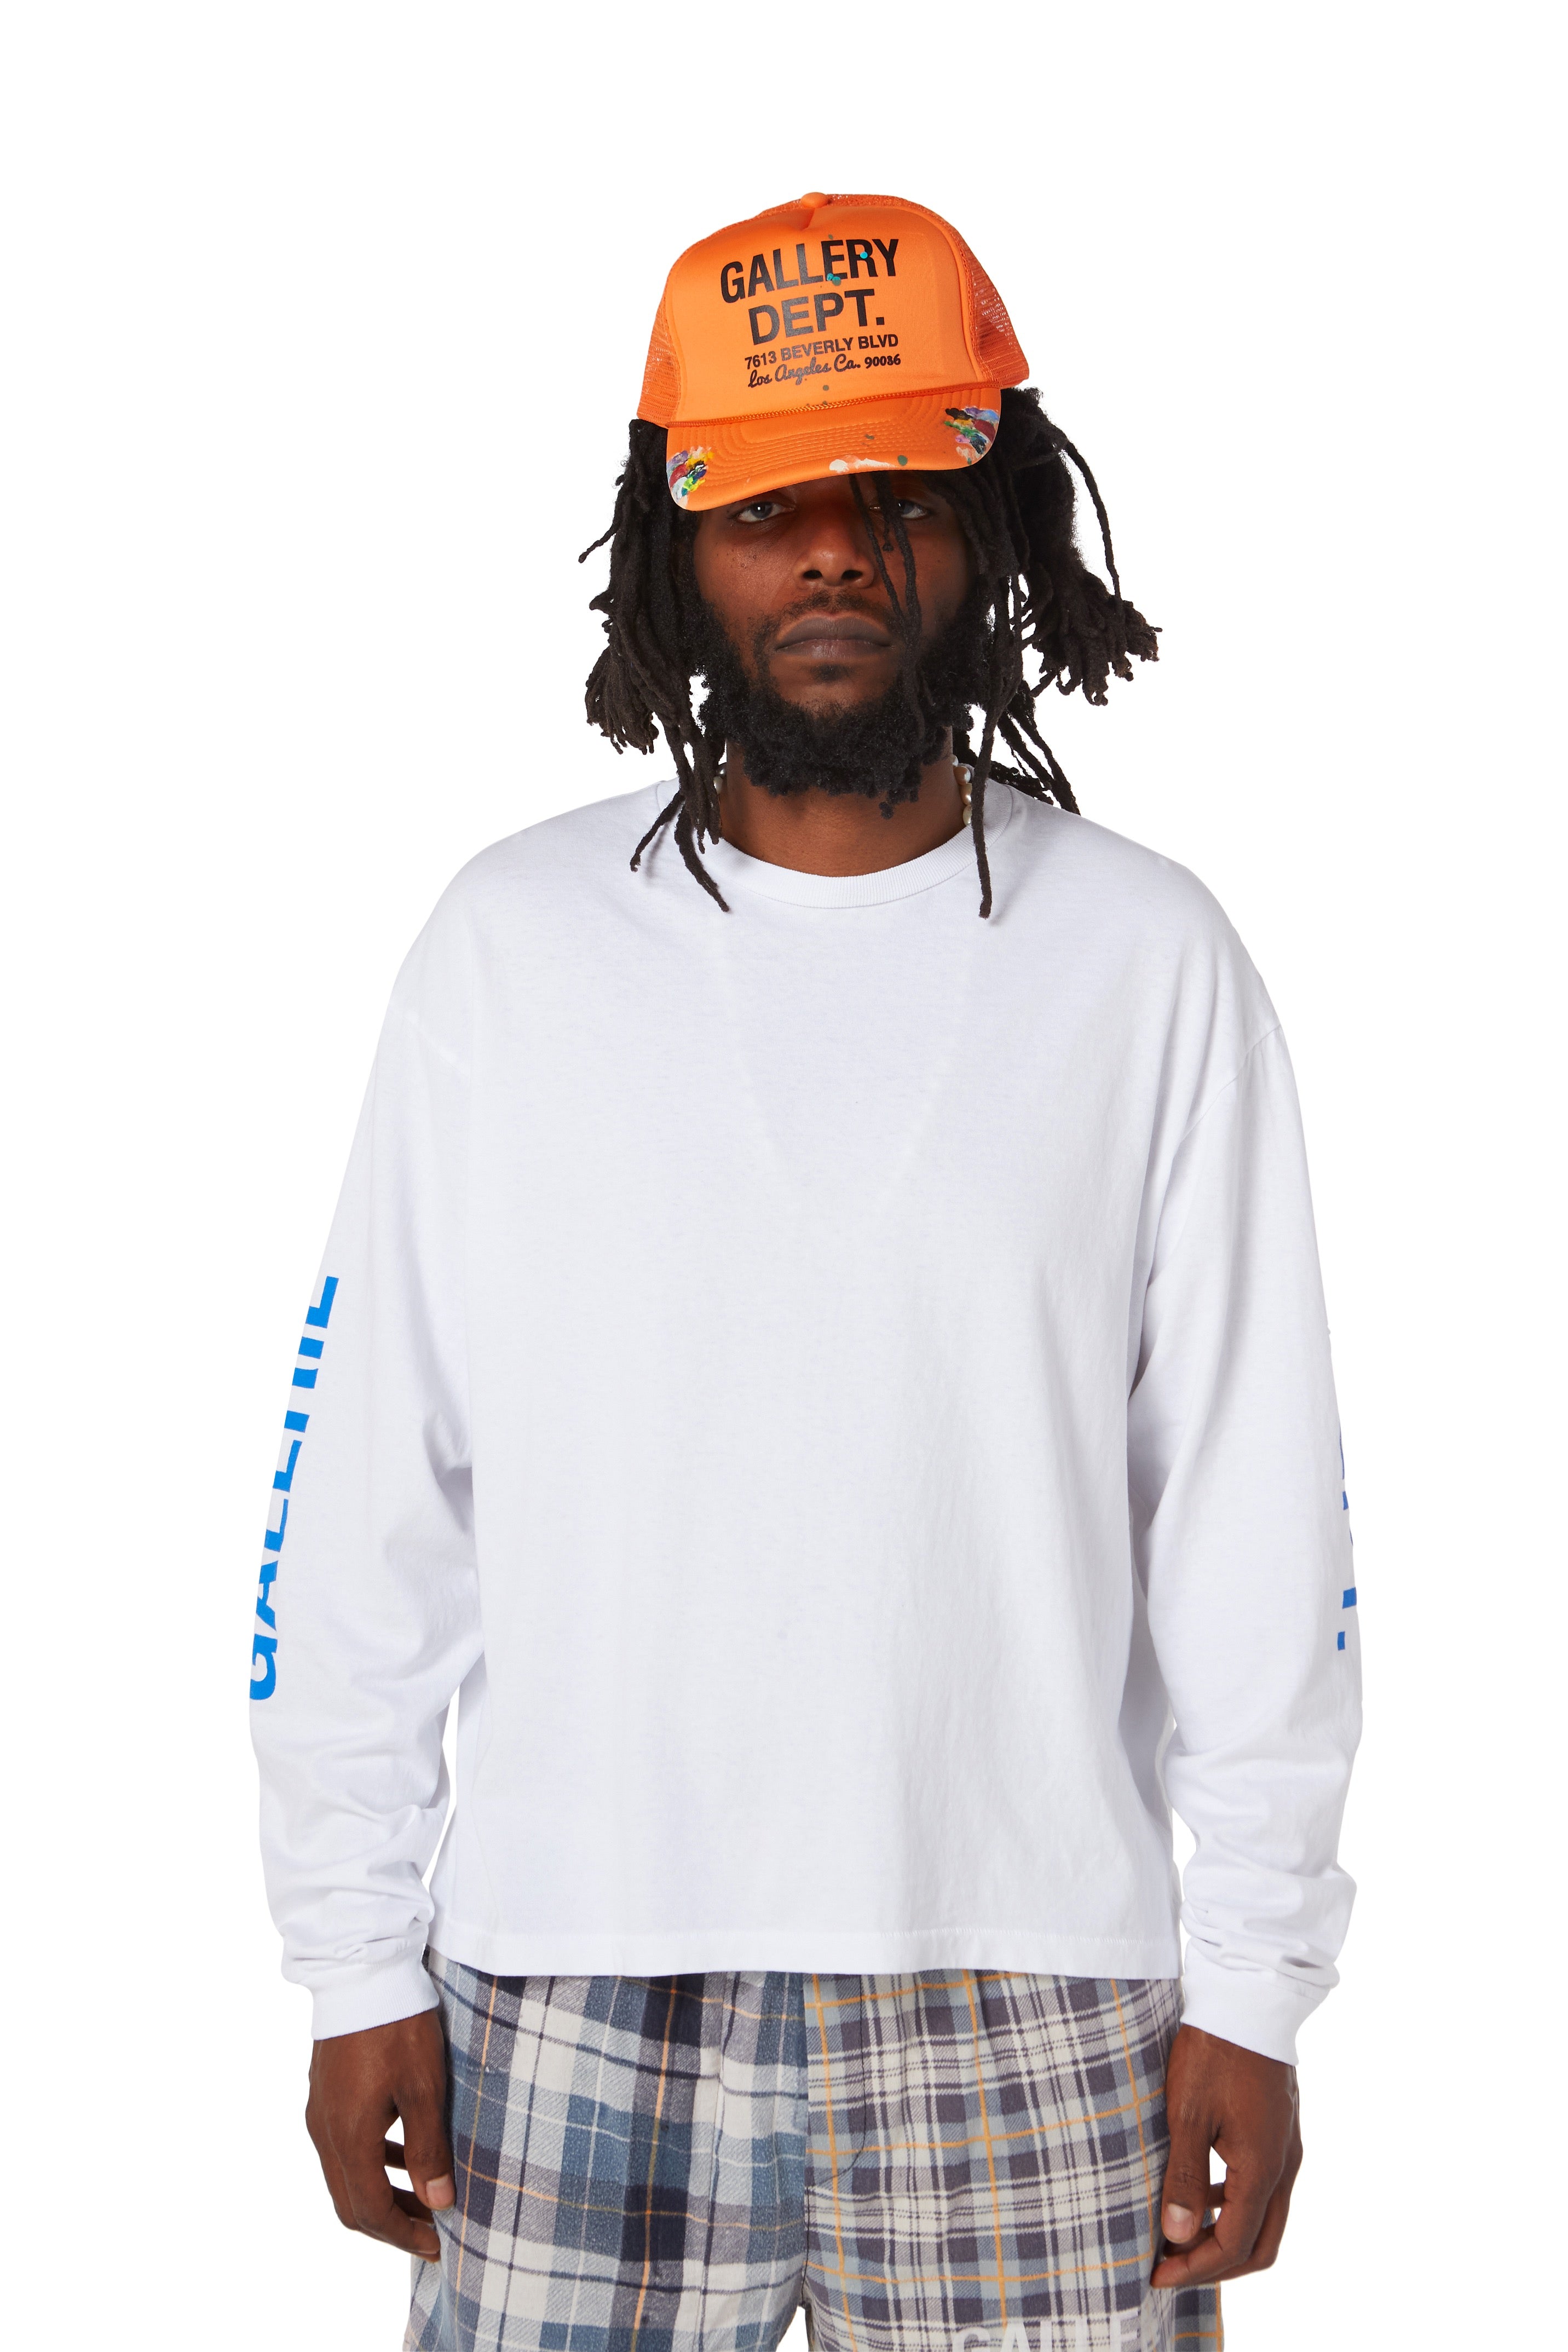 online Dept Gallery SLEEVE COLLECTOR LONG - FRENCH – T-SHIRT WHITE